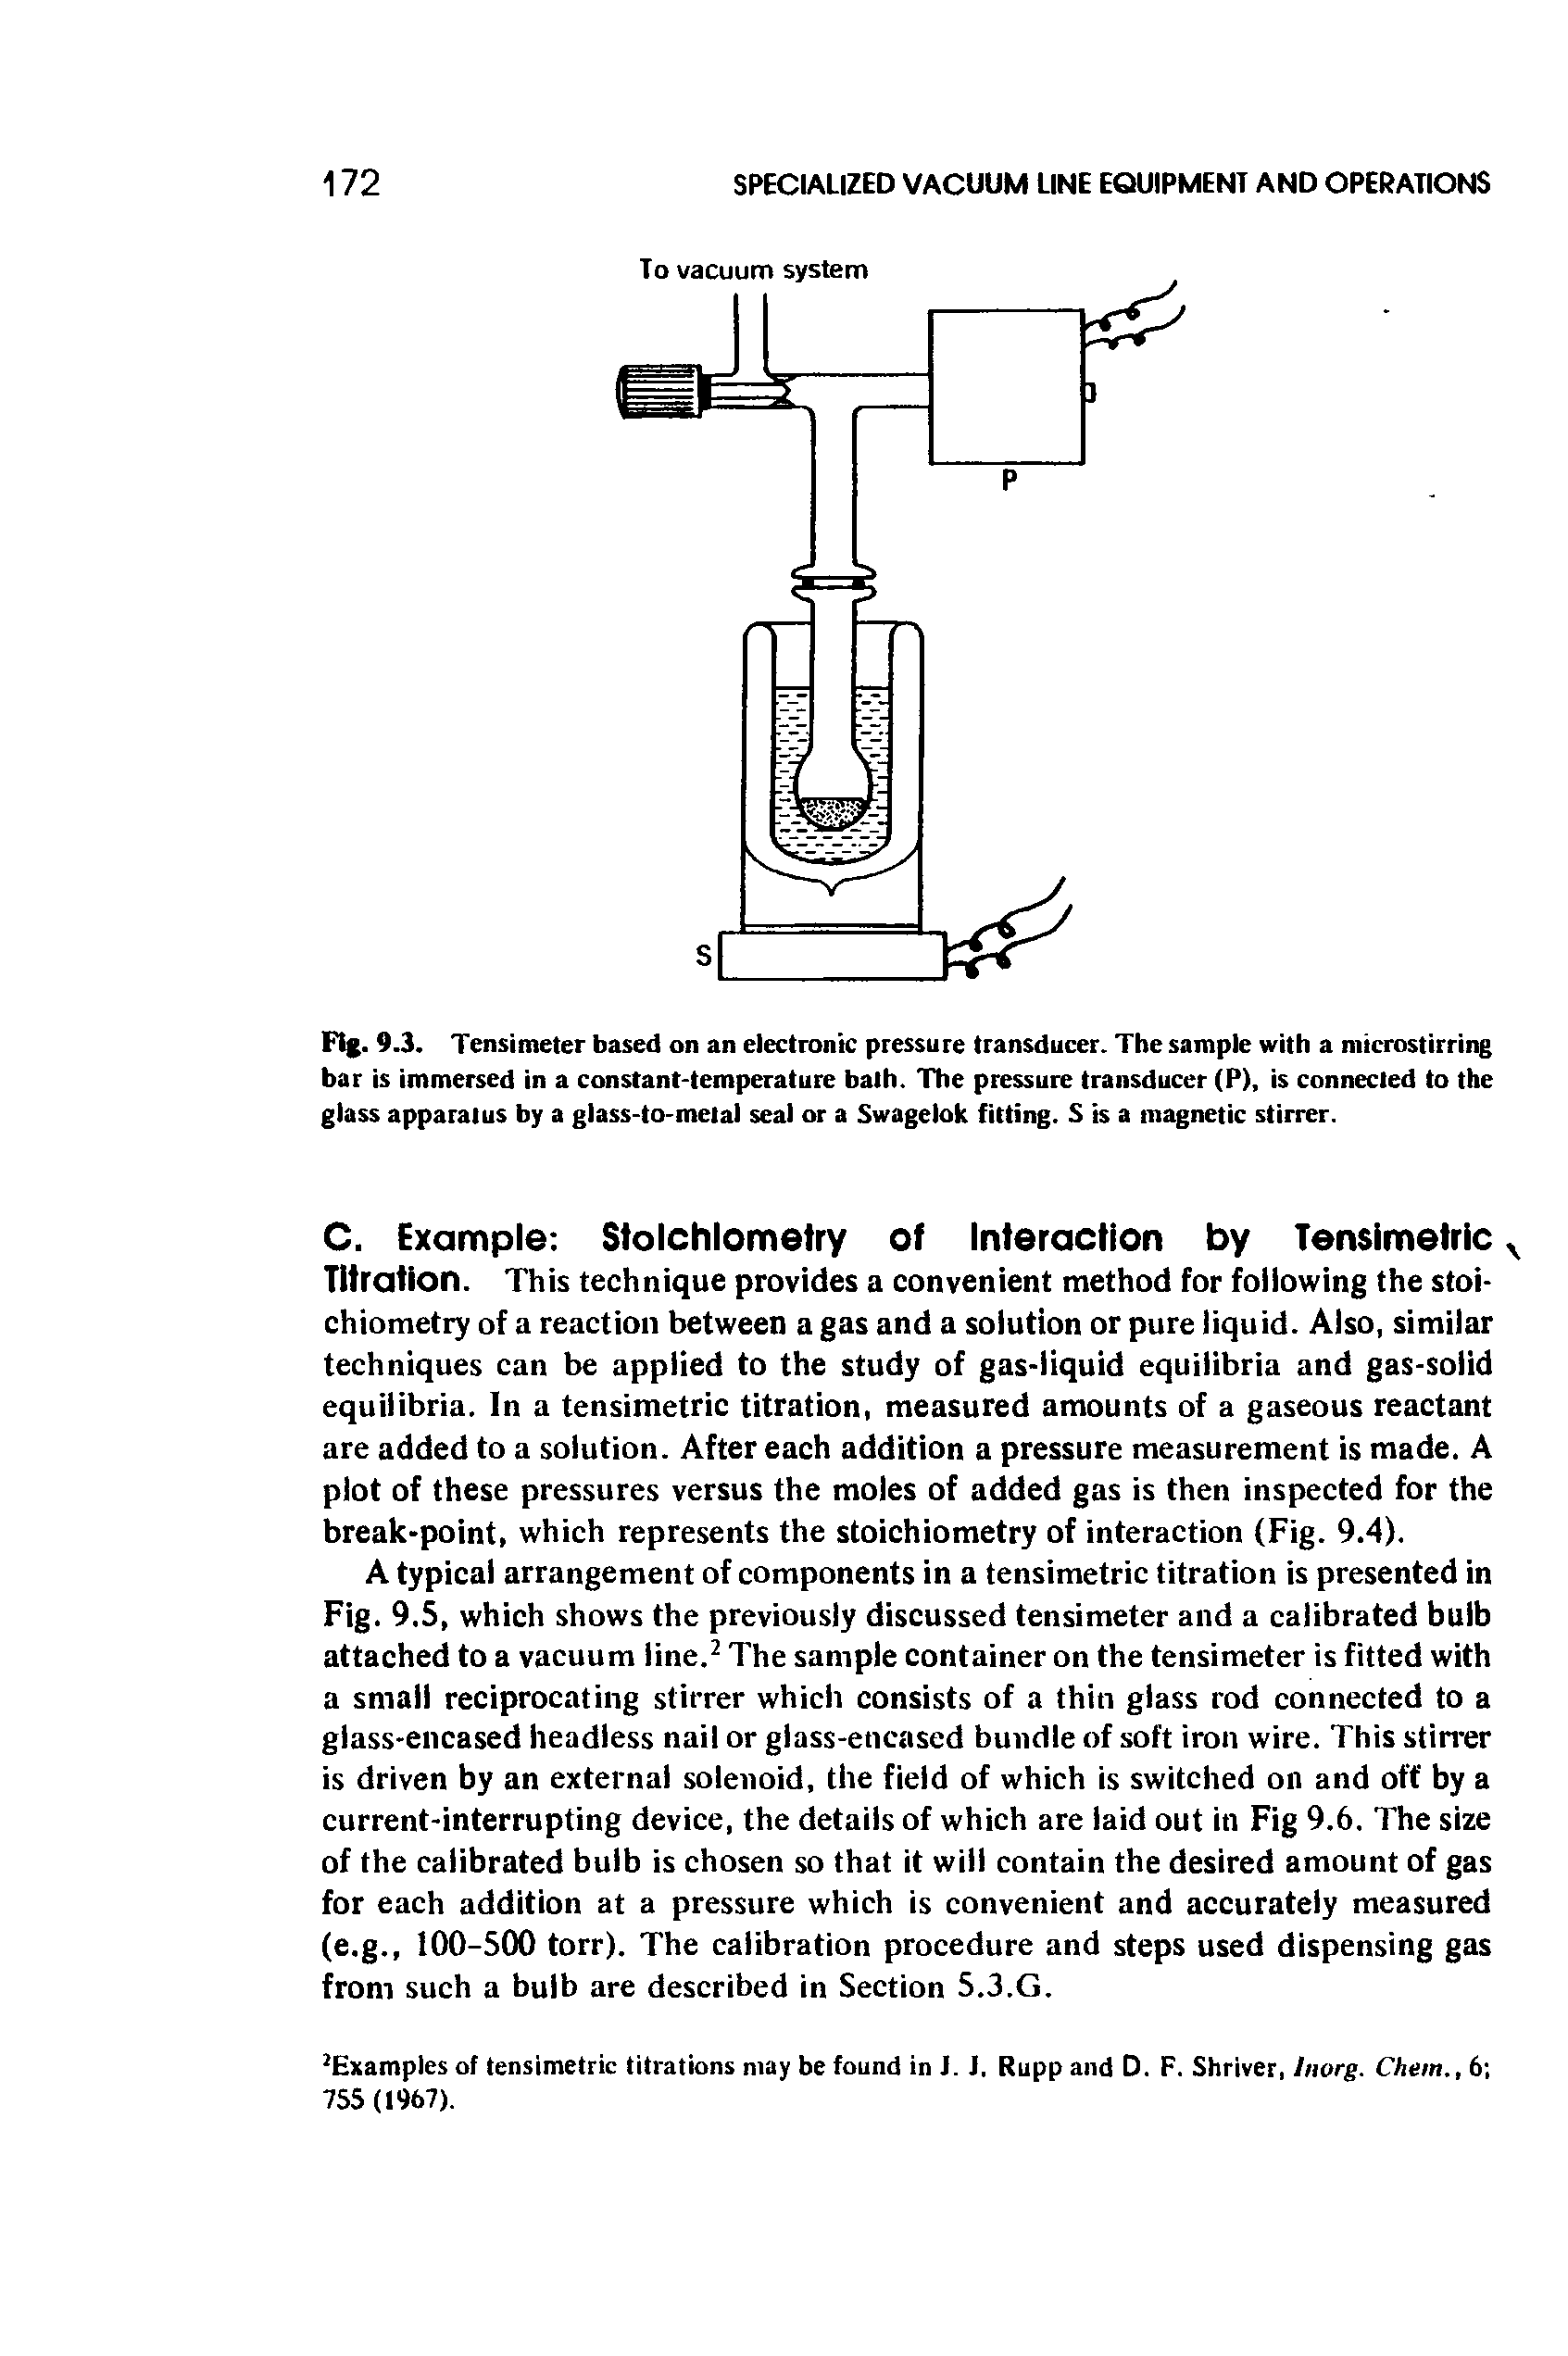 Fig. 9.3. Tensimeter based on an electronic pressure transducer. The sample with a microstirring bar is immersed in a constant-temperature bath. The pressure transducer (P), is connected to the glass apparatus by a glass-to-metal seal or a Swagelok fitting. S is a magnetic stirrer.